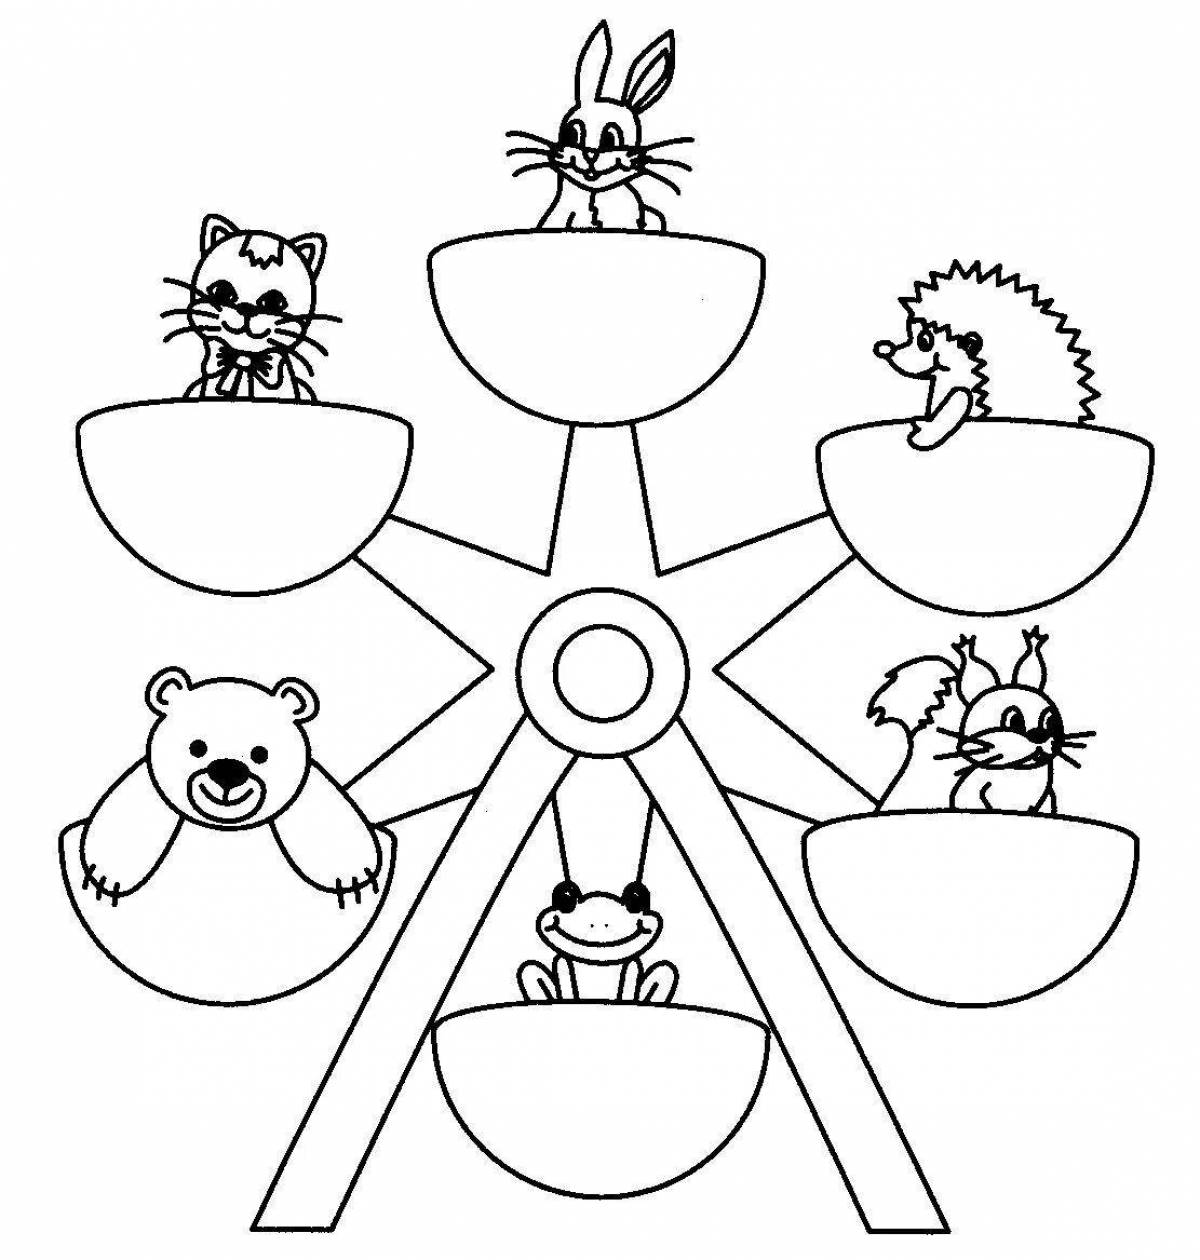 Adorable carousel coloring book for toddlers